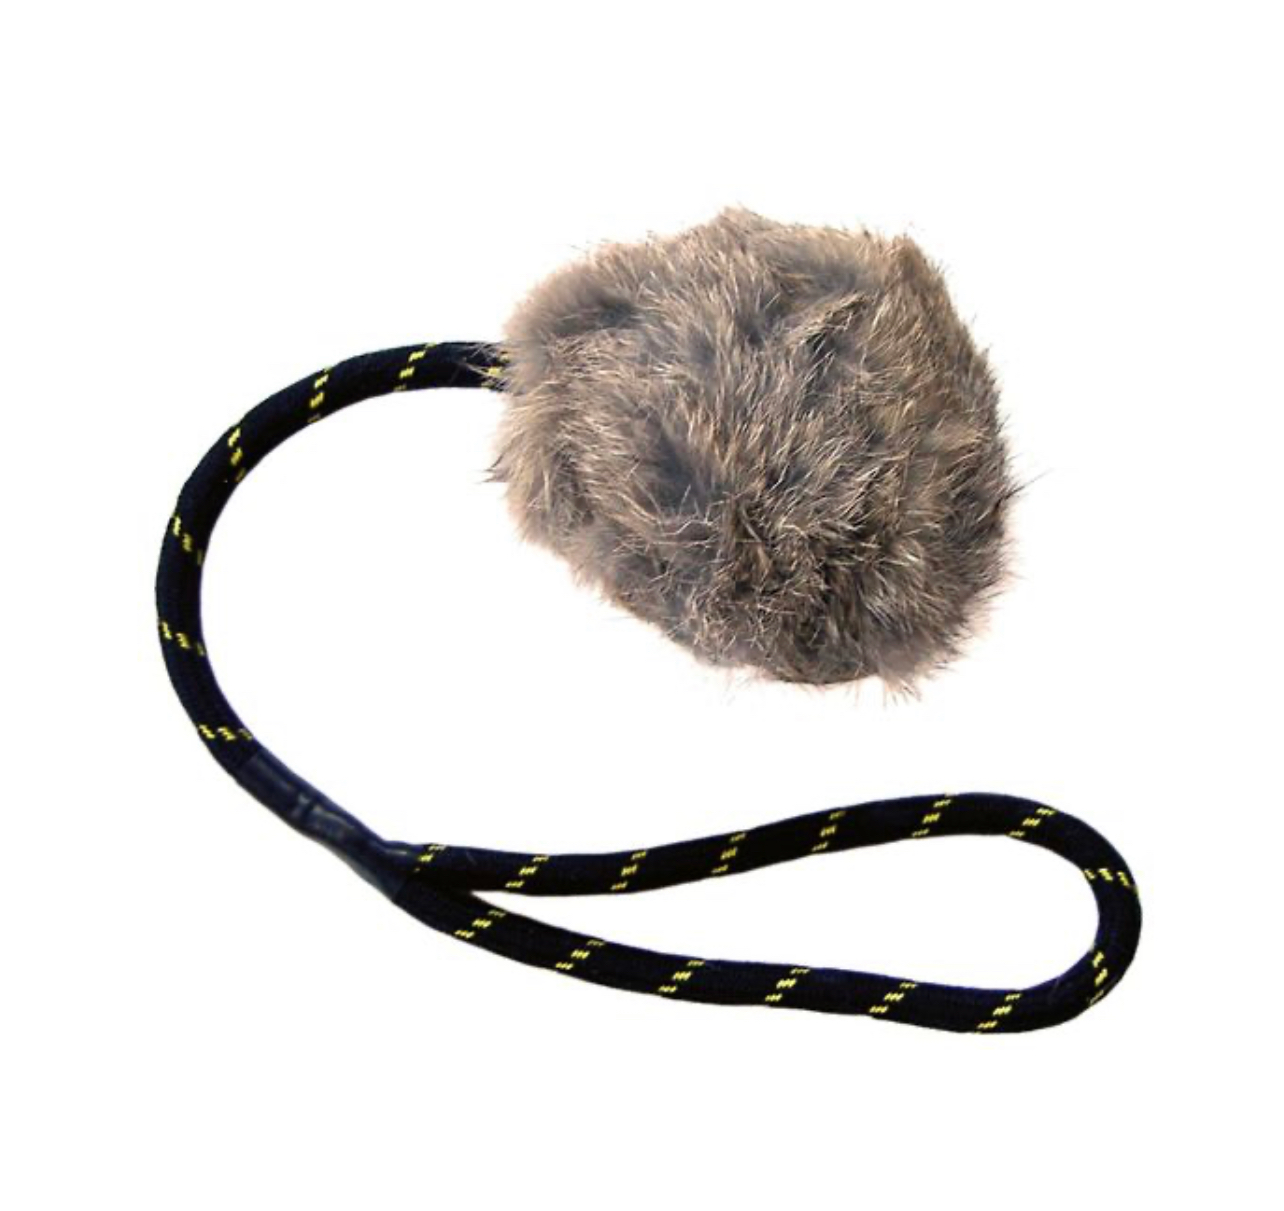 BG Rabbit Distance marking ball with rope